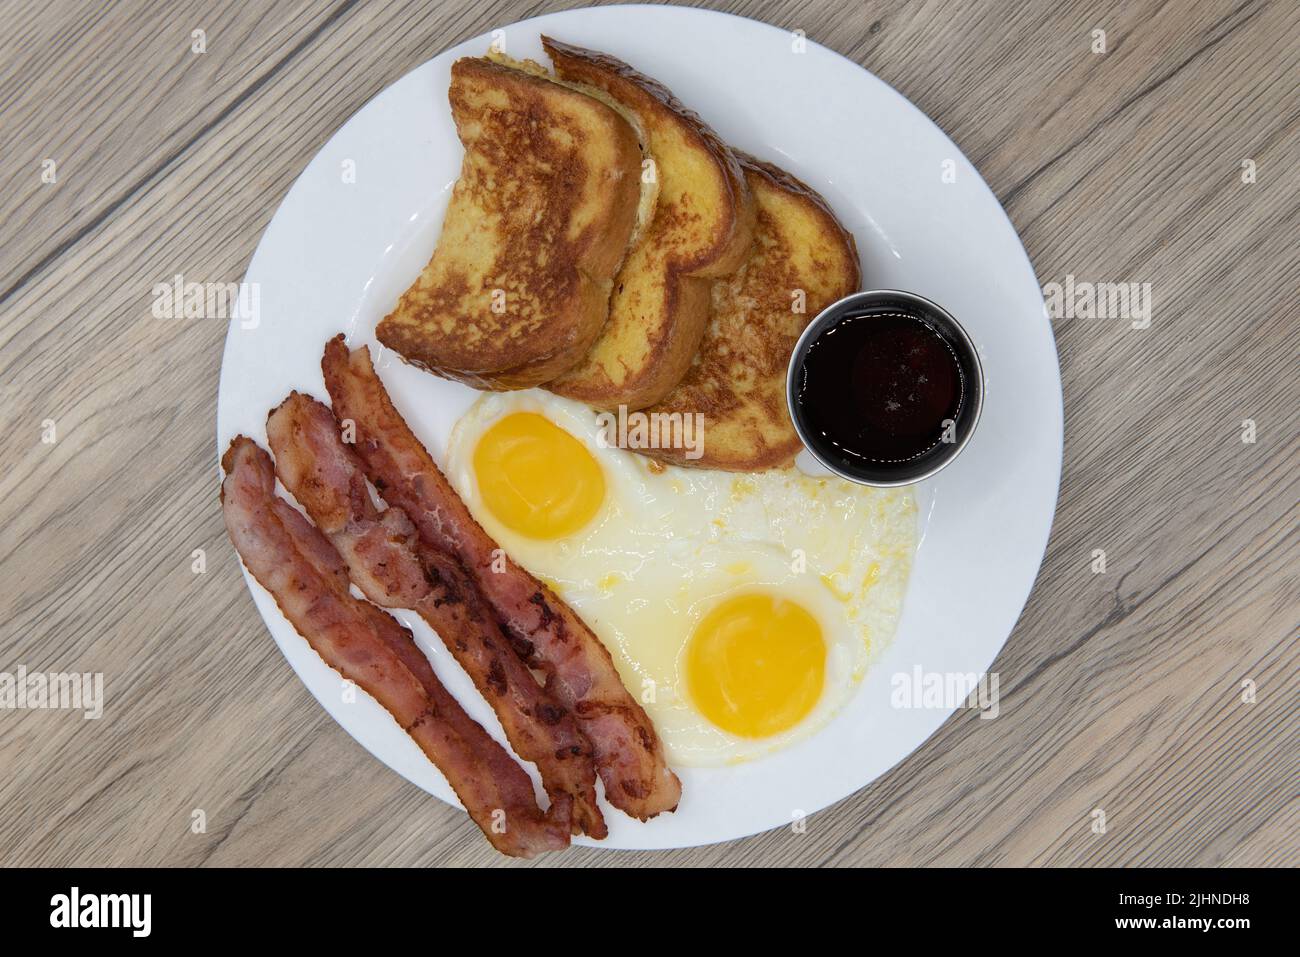 Overhead view of traditional American breakfast consisting of french toast, fried eggs, and bacon will ensure that the belly will be full. Stock Photo